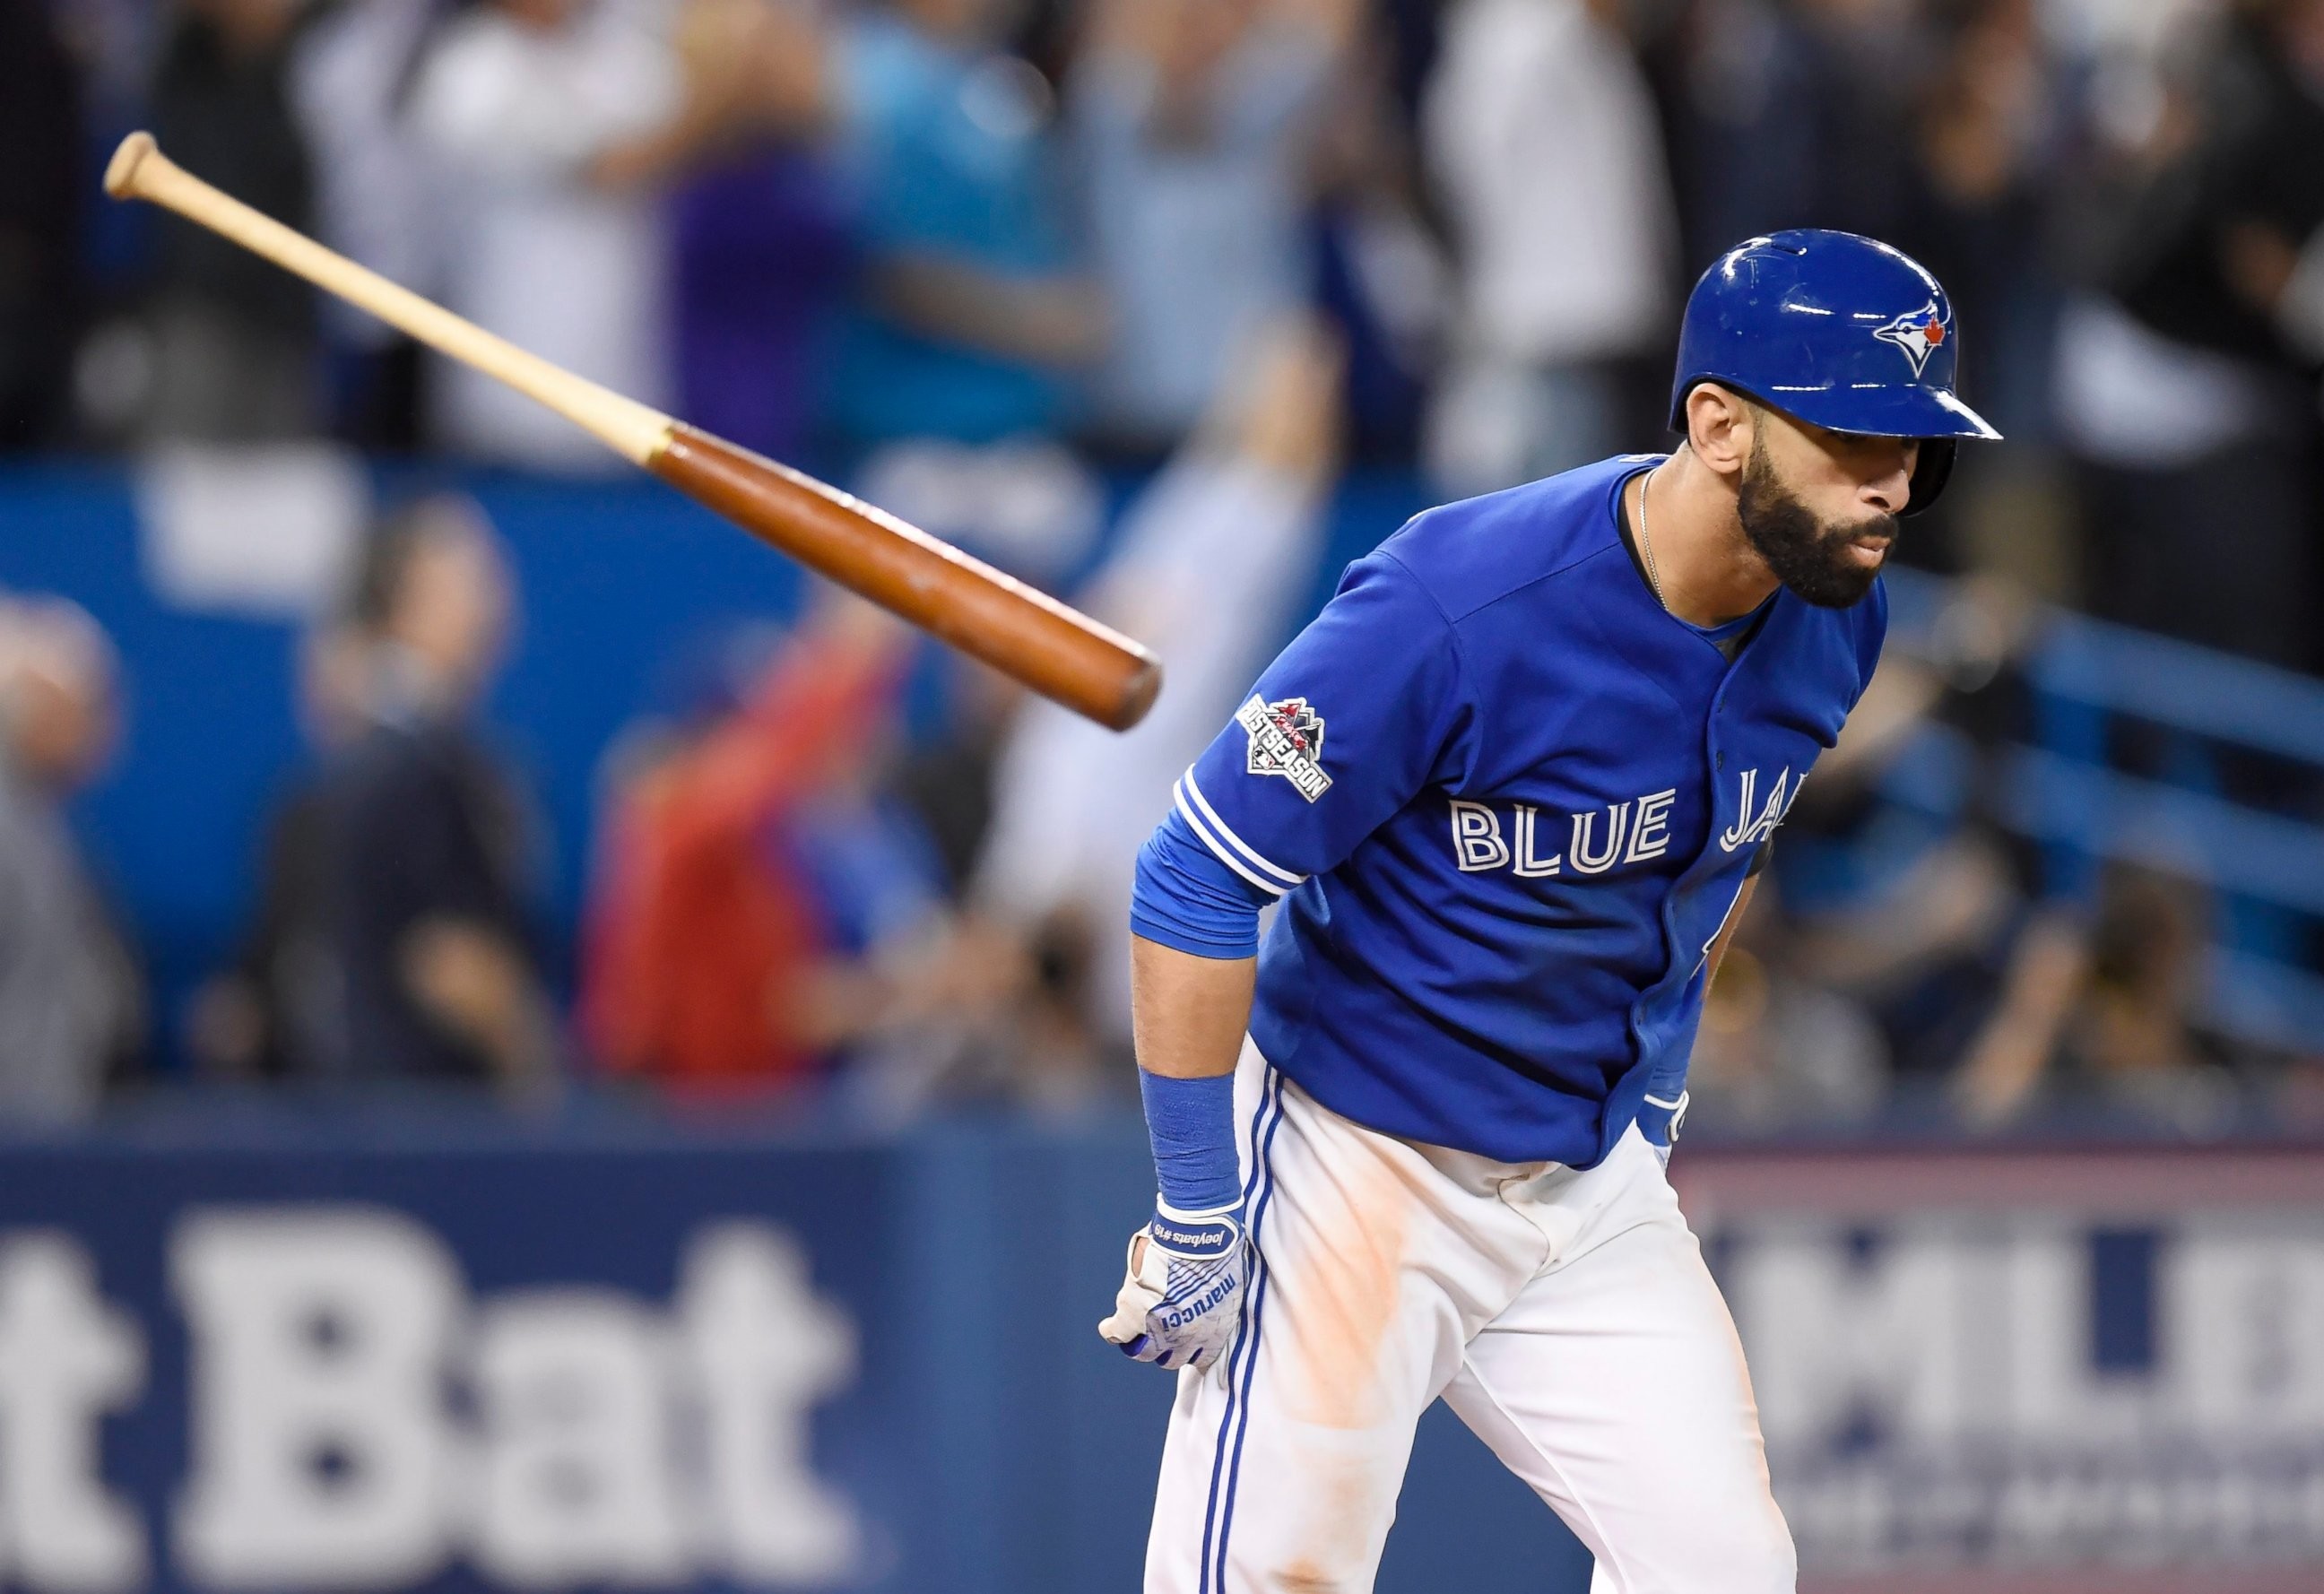 2592x1778 PHOTO: Toronto Blue Jays' Jose Bautista flips his bat after hitting a  three-run home run against the Texas Rangers during the seventh inning in  Game 5 of ...